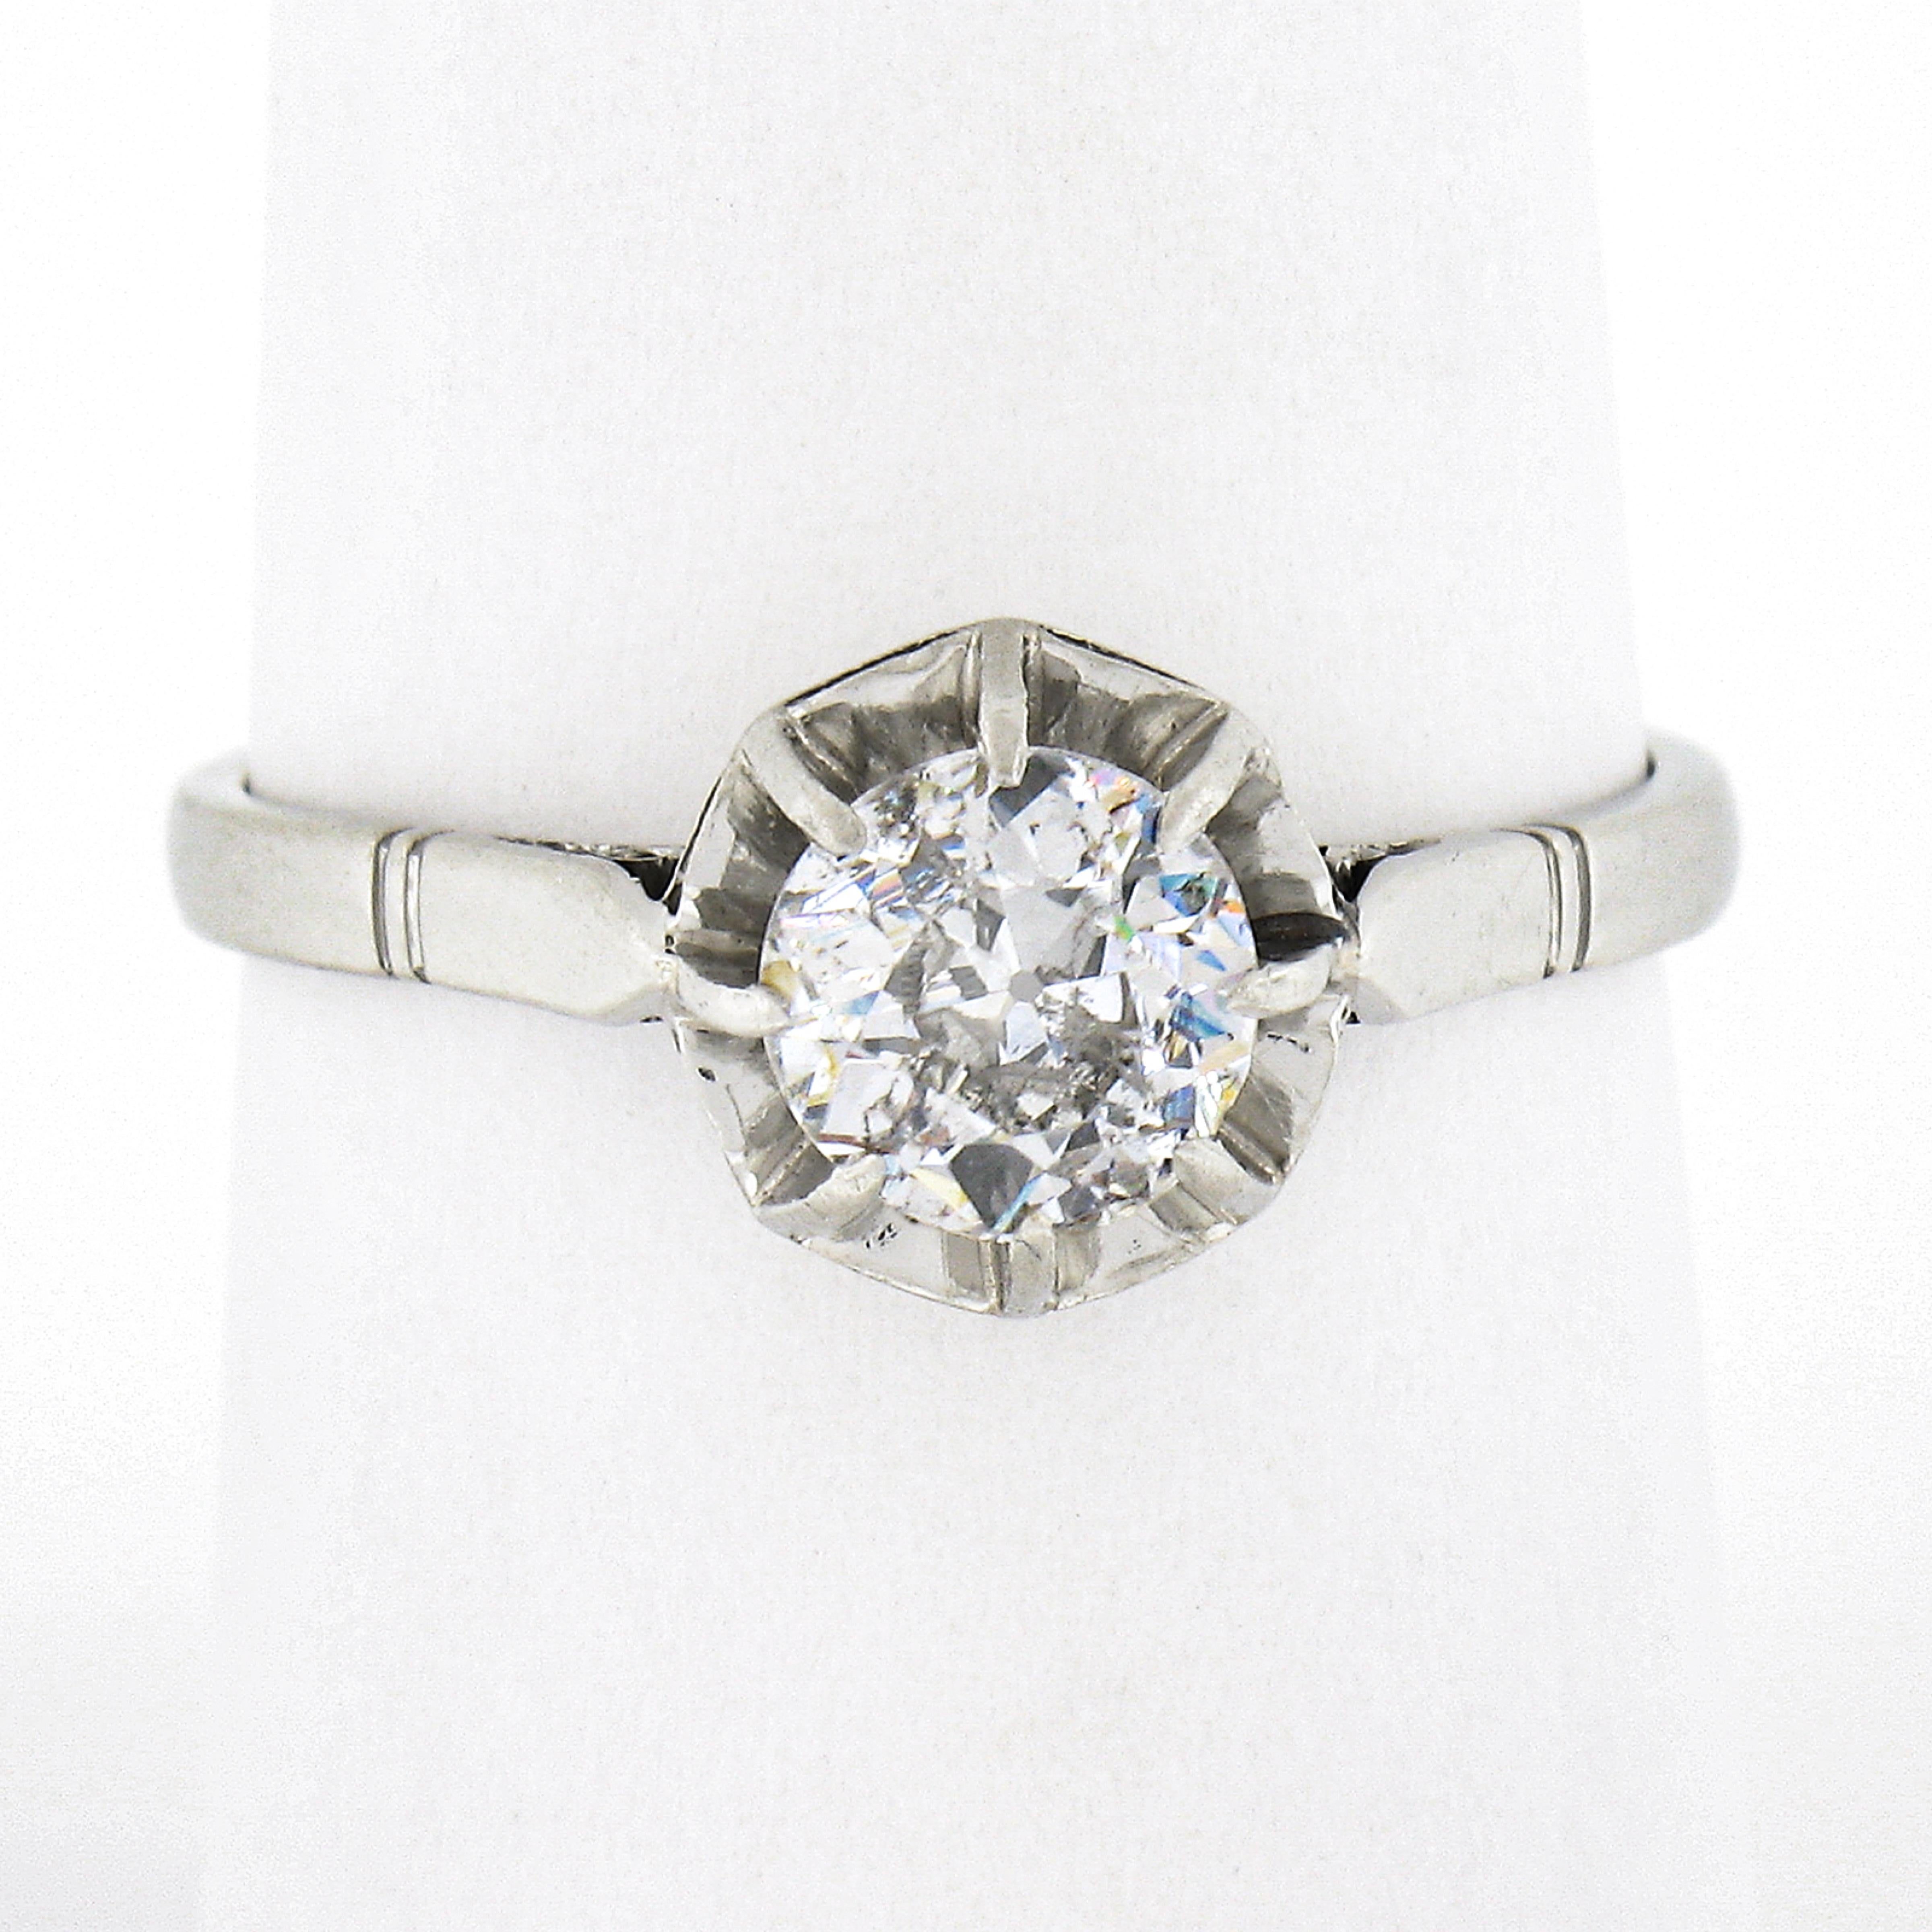 This gorgeous antique engagement ring was crafted in France from solid platinum during the art deco period and carries a stunning and super fiery old European cut diamond solitaire at its center. This fine quality diamond weighs approximately 0.80